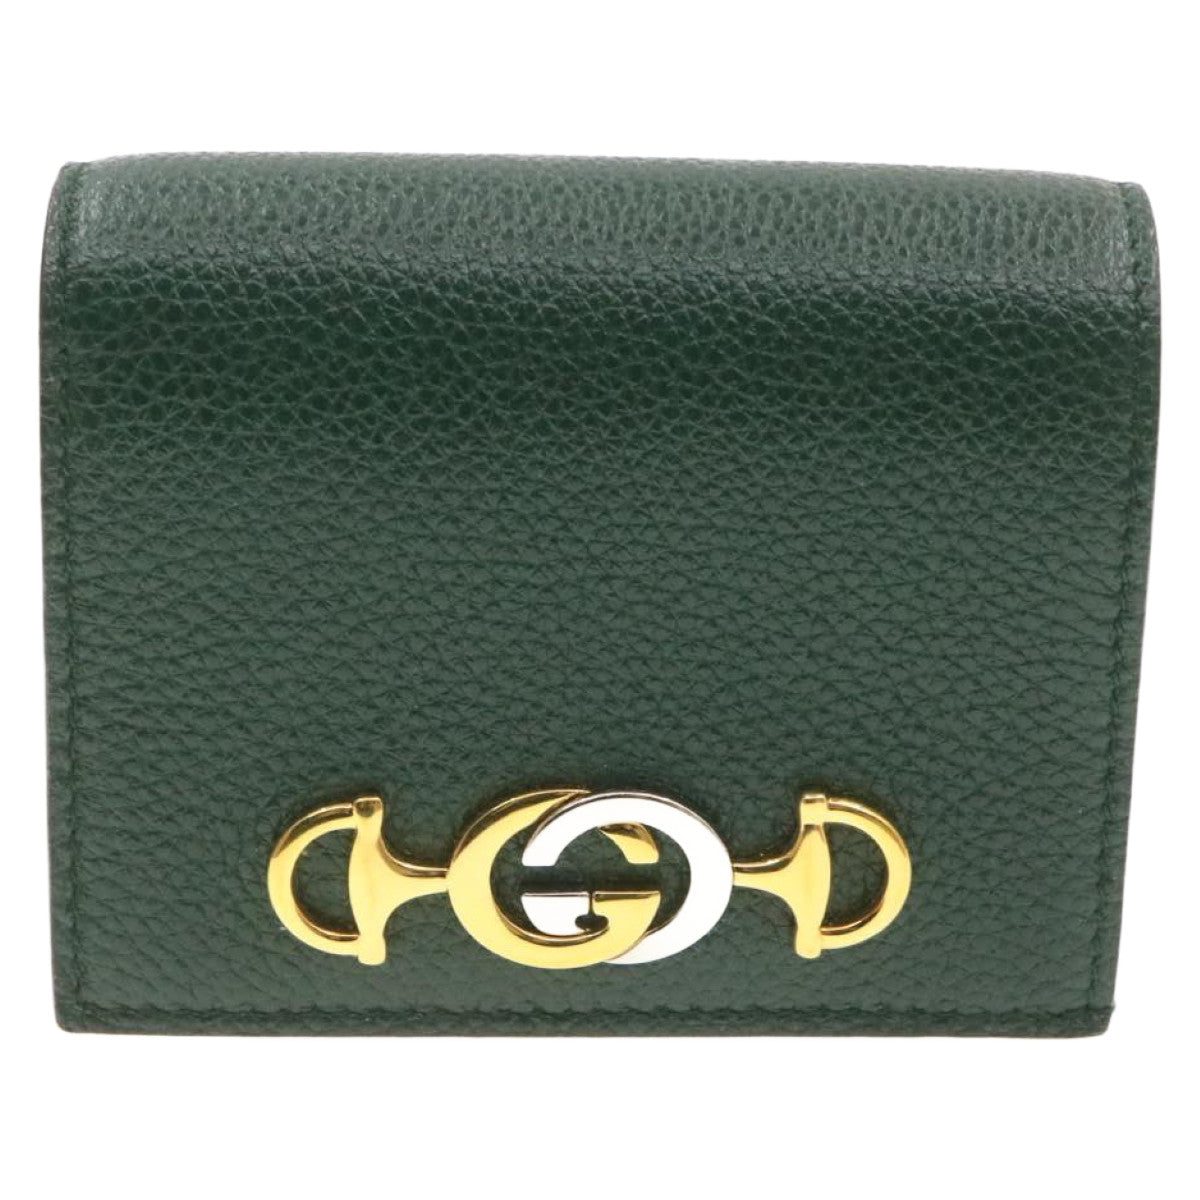 GUCCI Zumi Long Wallet Leather Green Auth am272b - 0